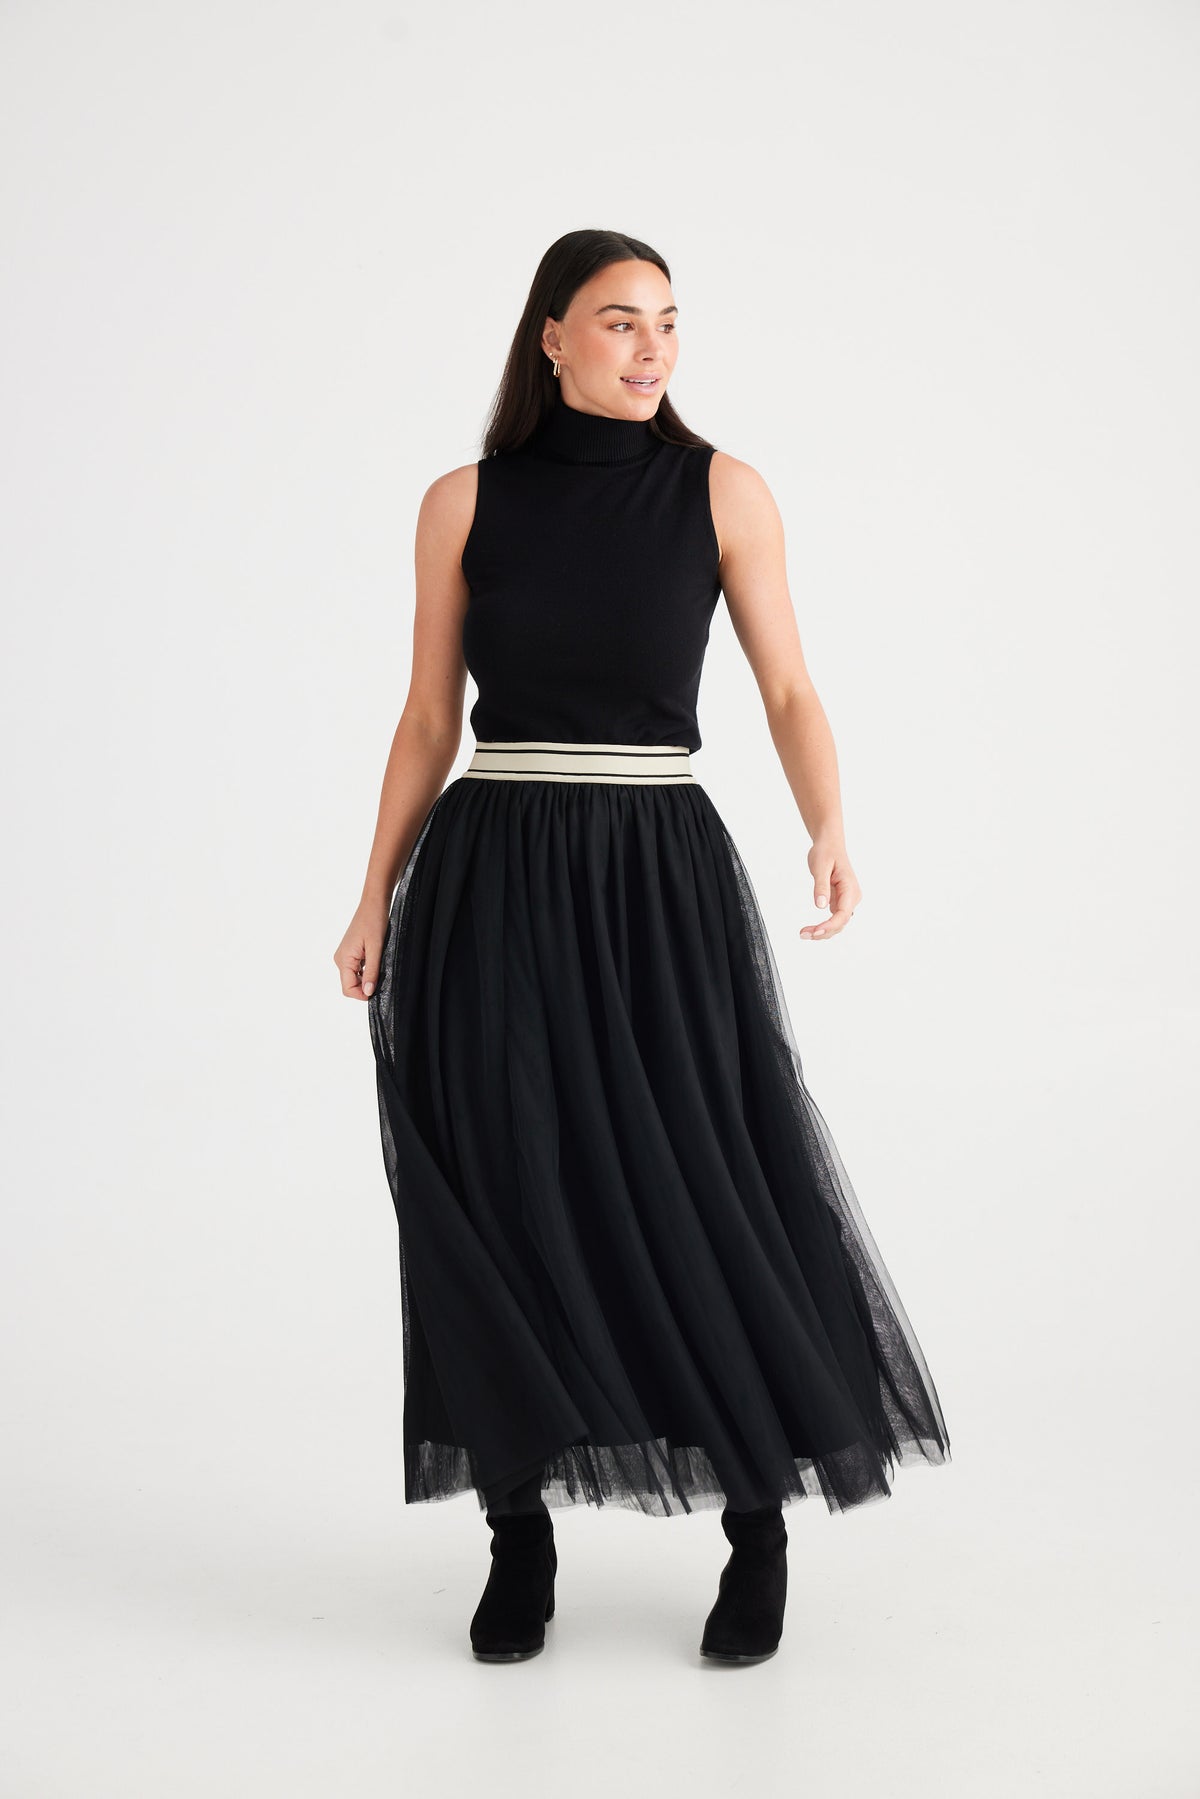 Carrie skirt - black with stripe